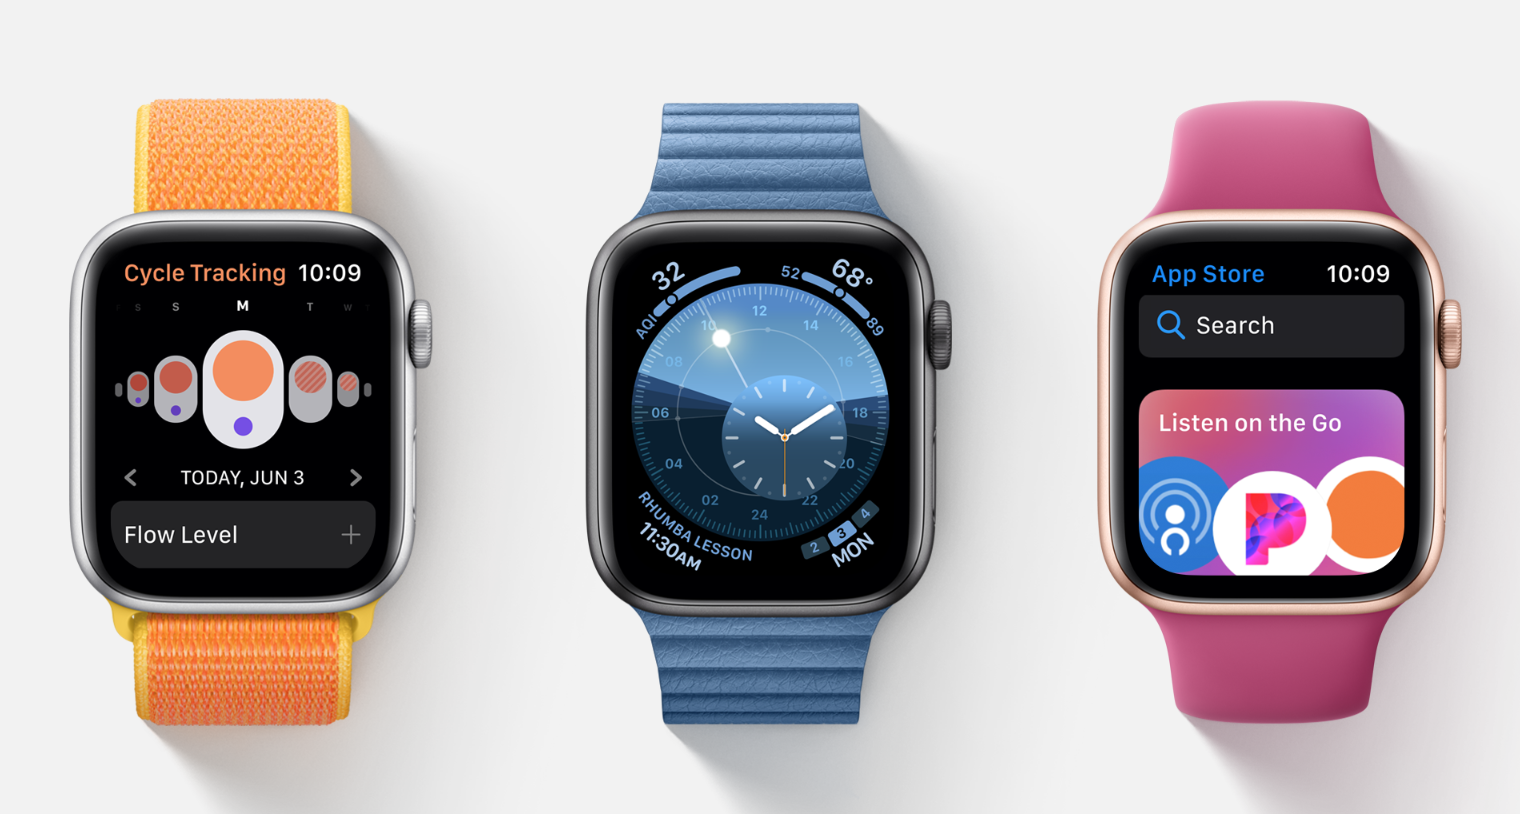 3) The Apple Watch gets App Store